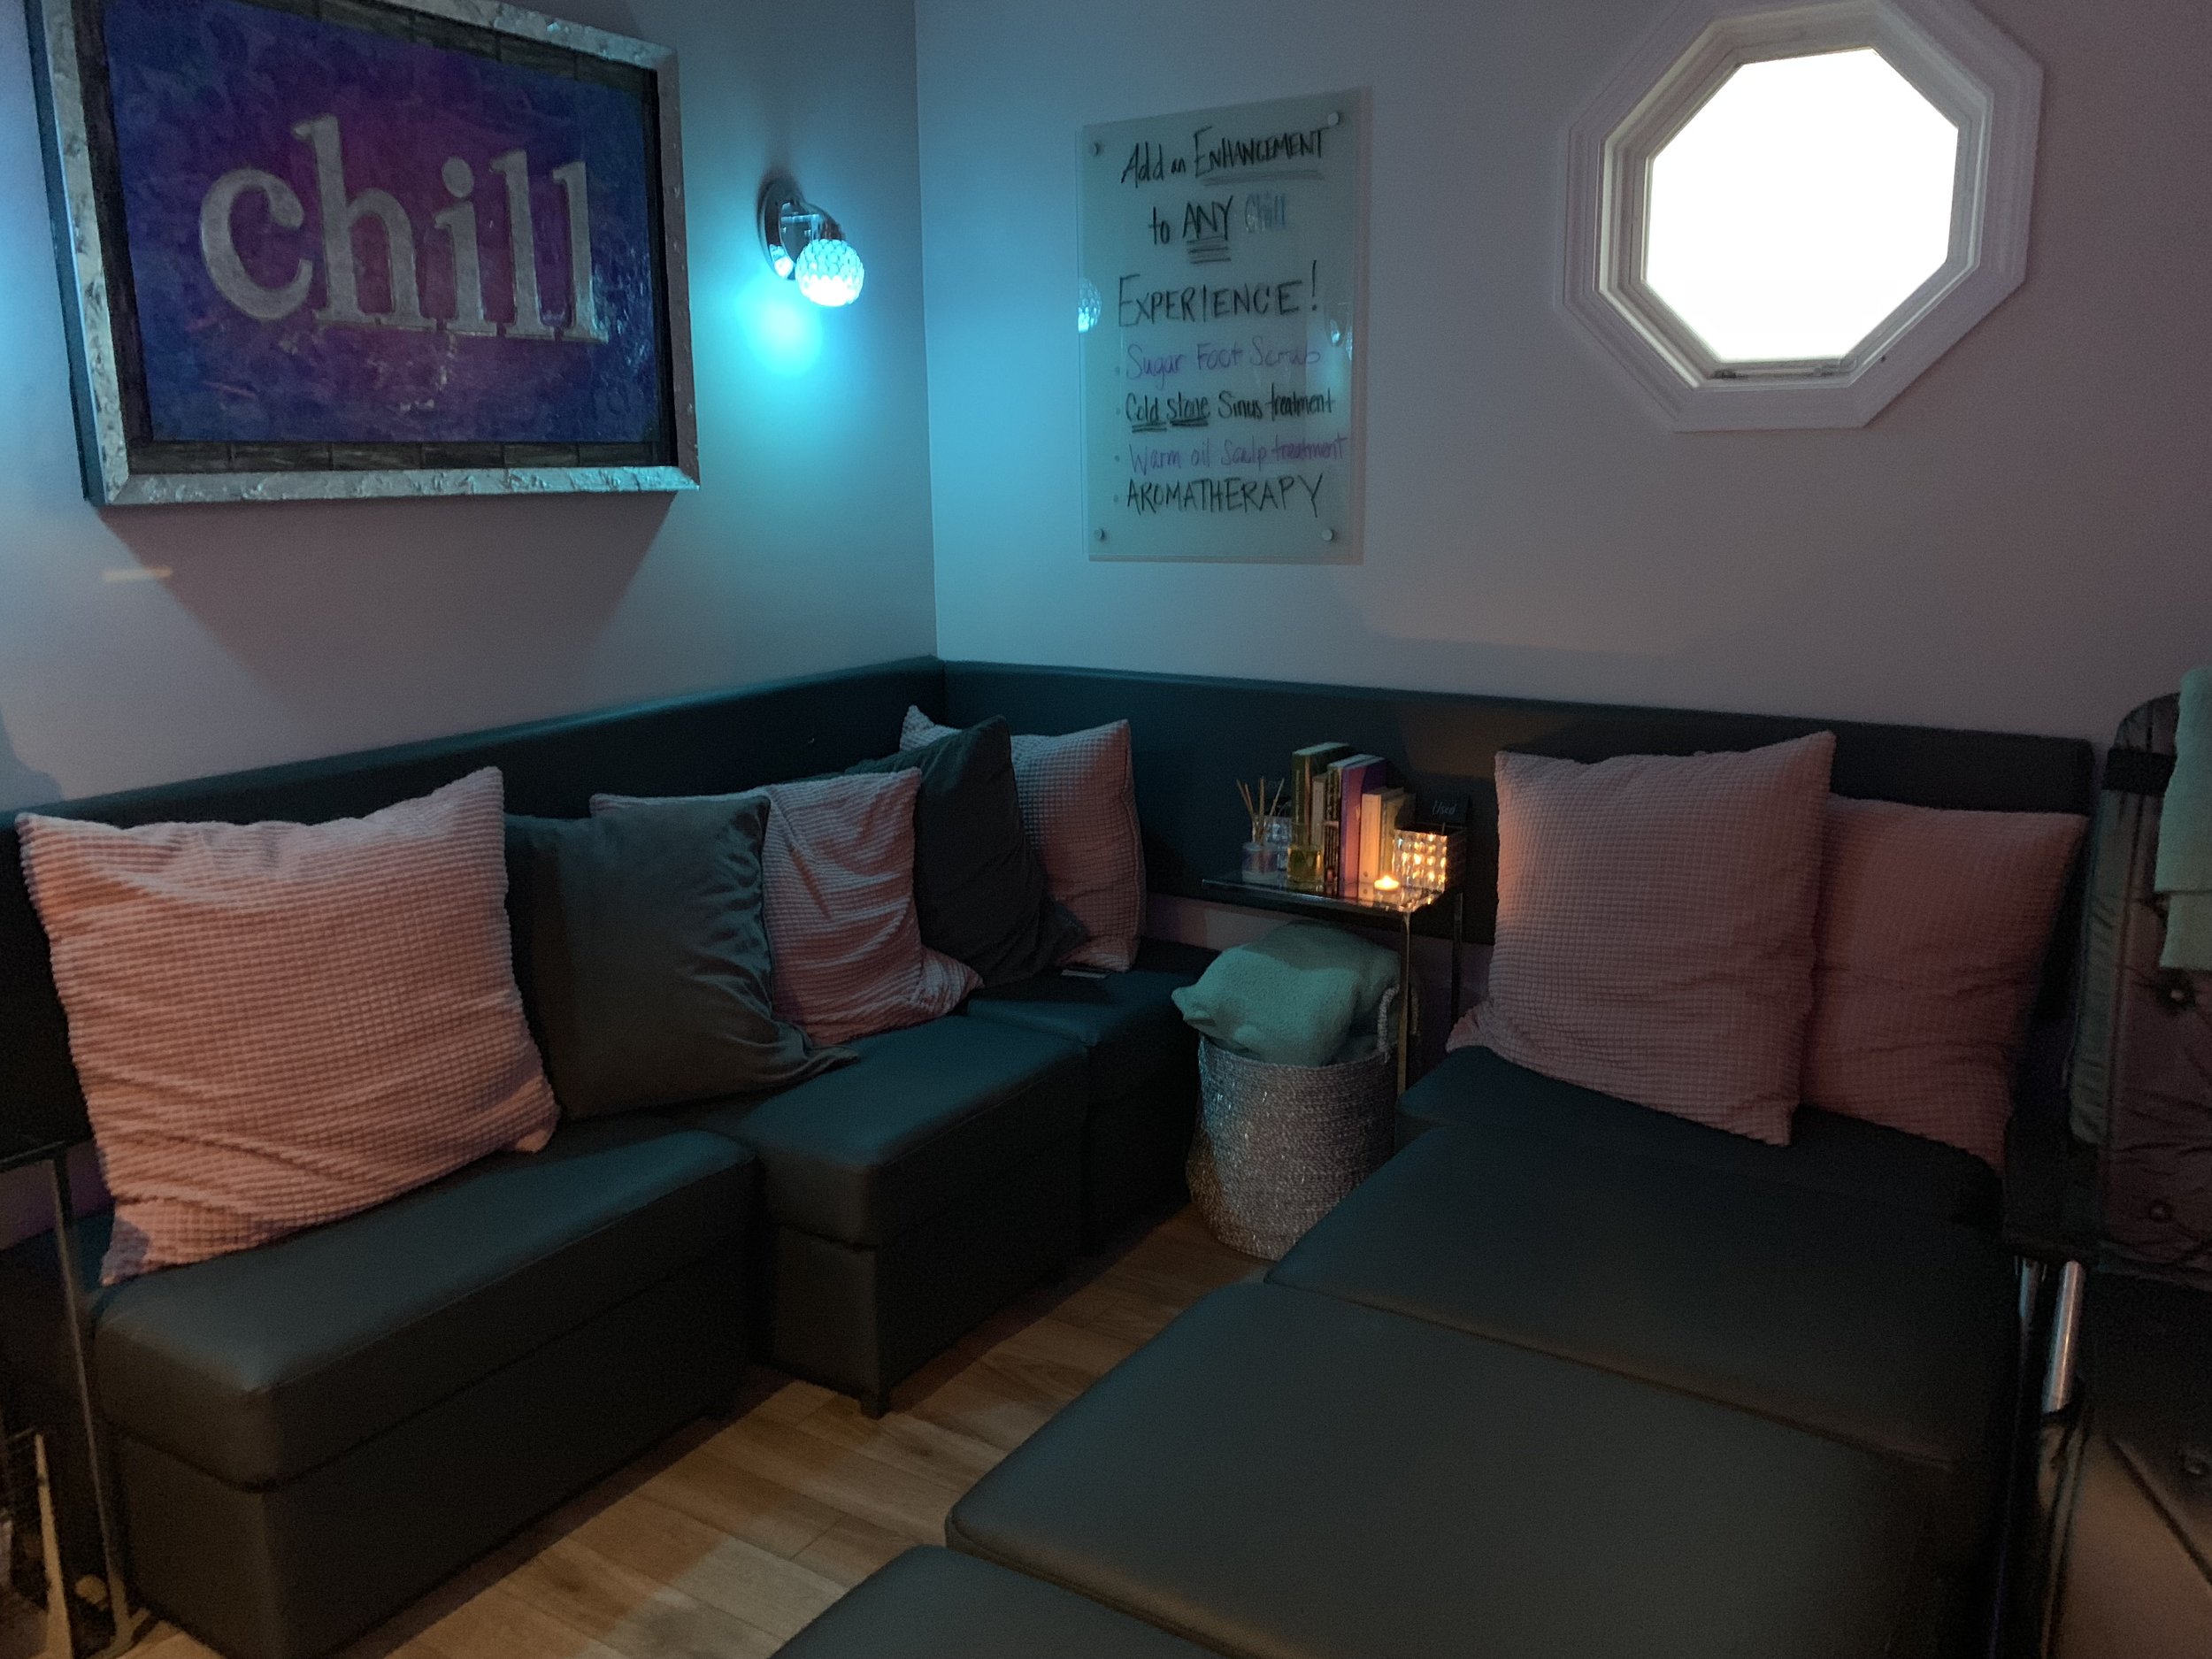 The make-up station, pedicure chairs, hair styling area, Chill lounge, steam shower and therapy room at Chill Spa.